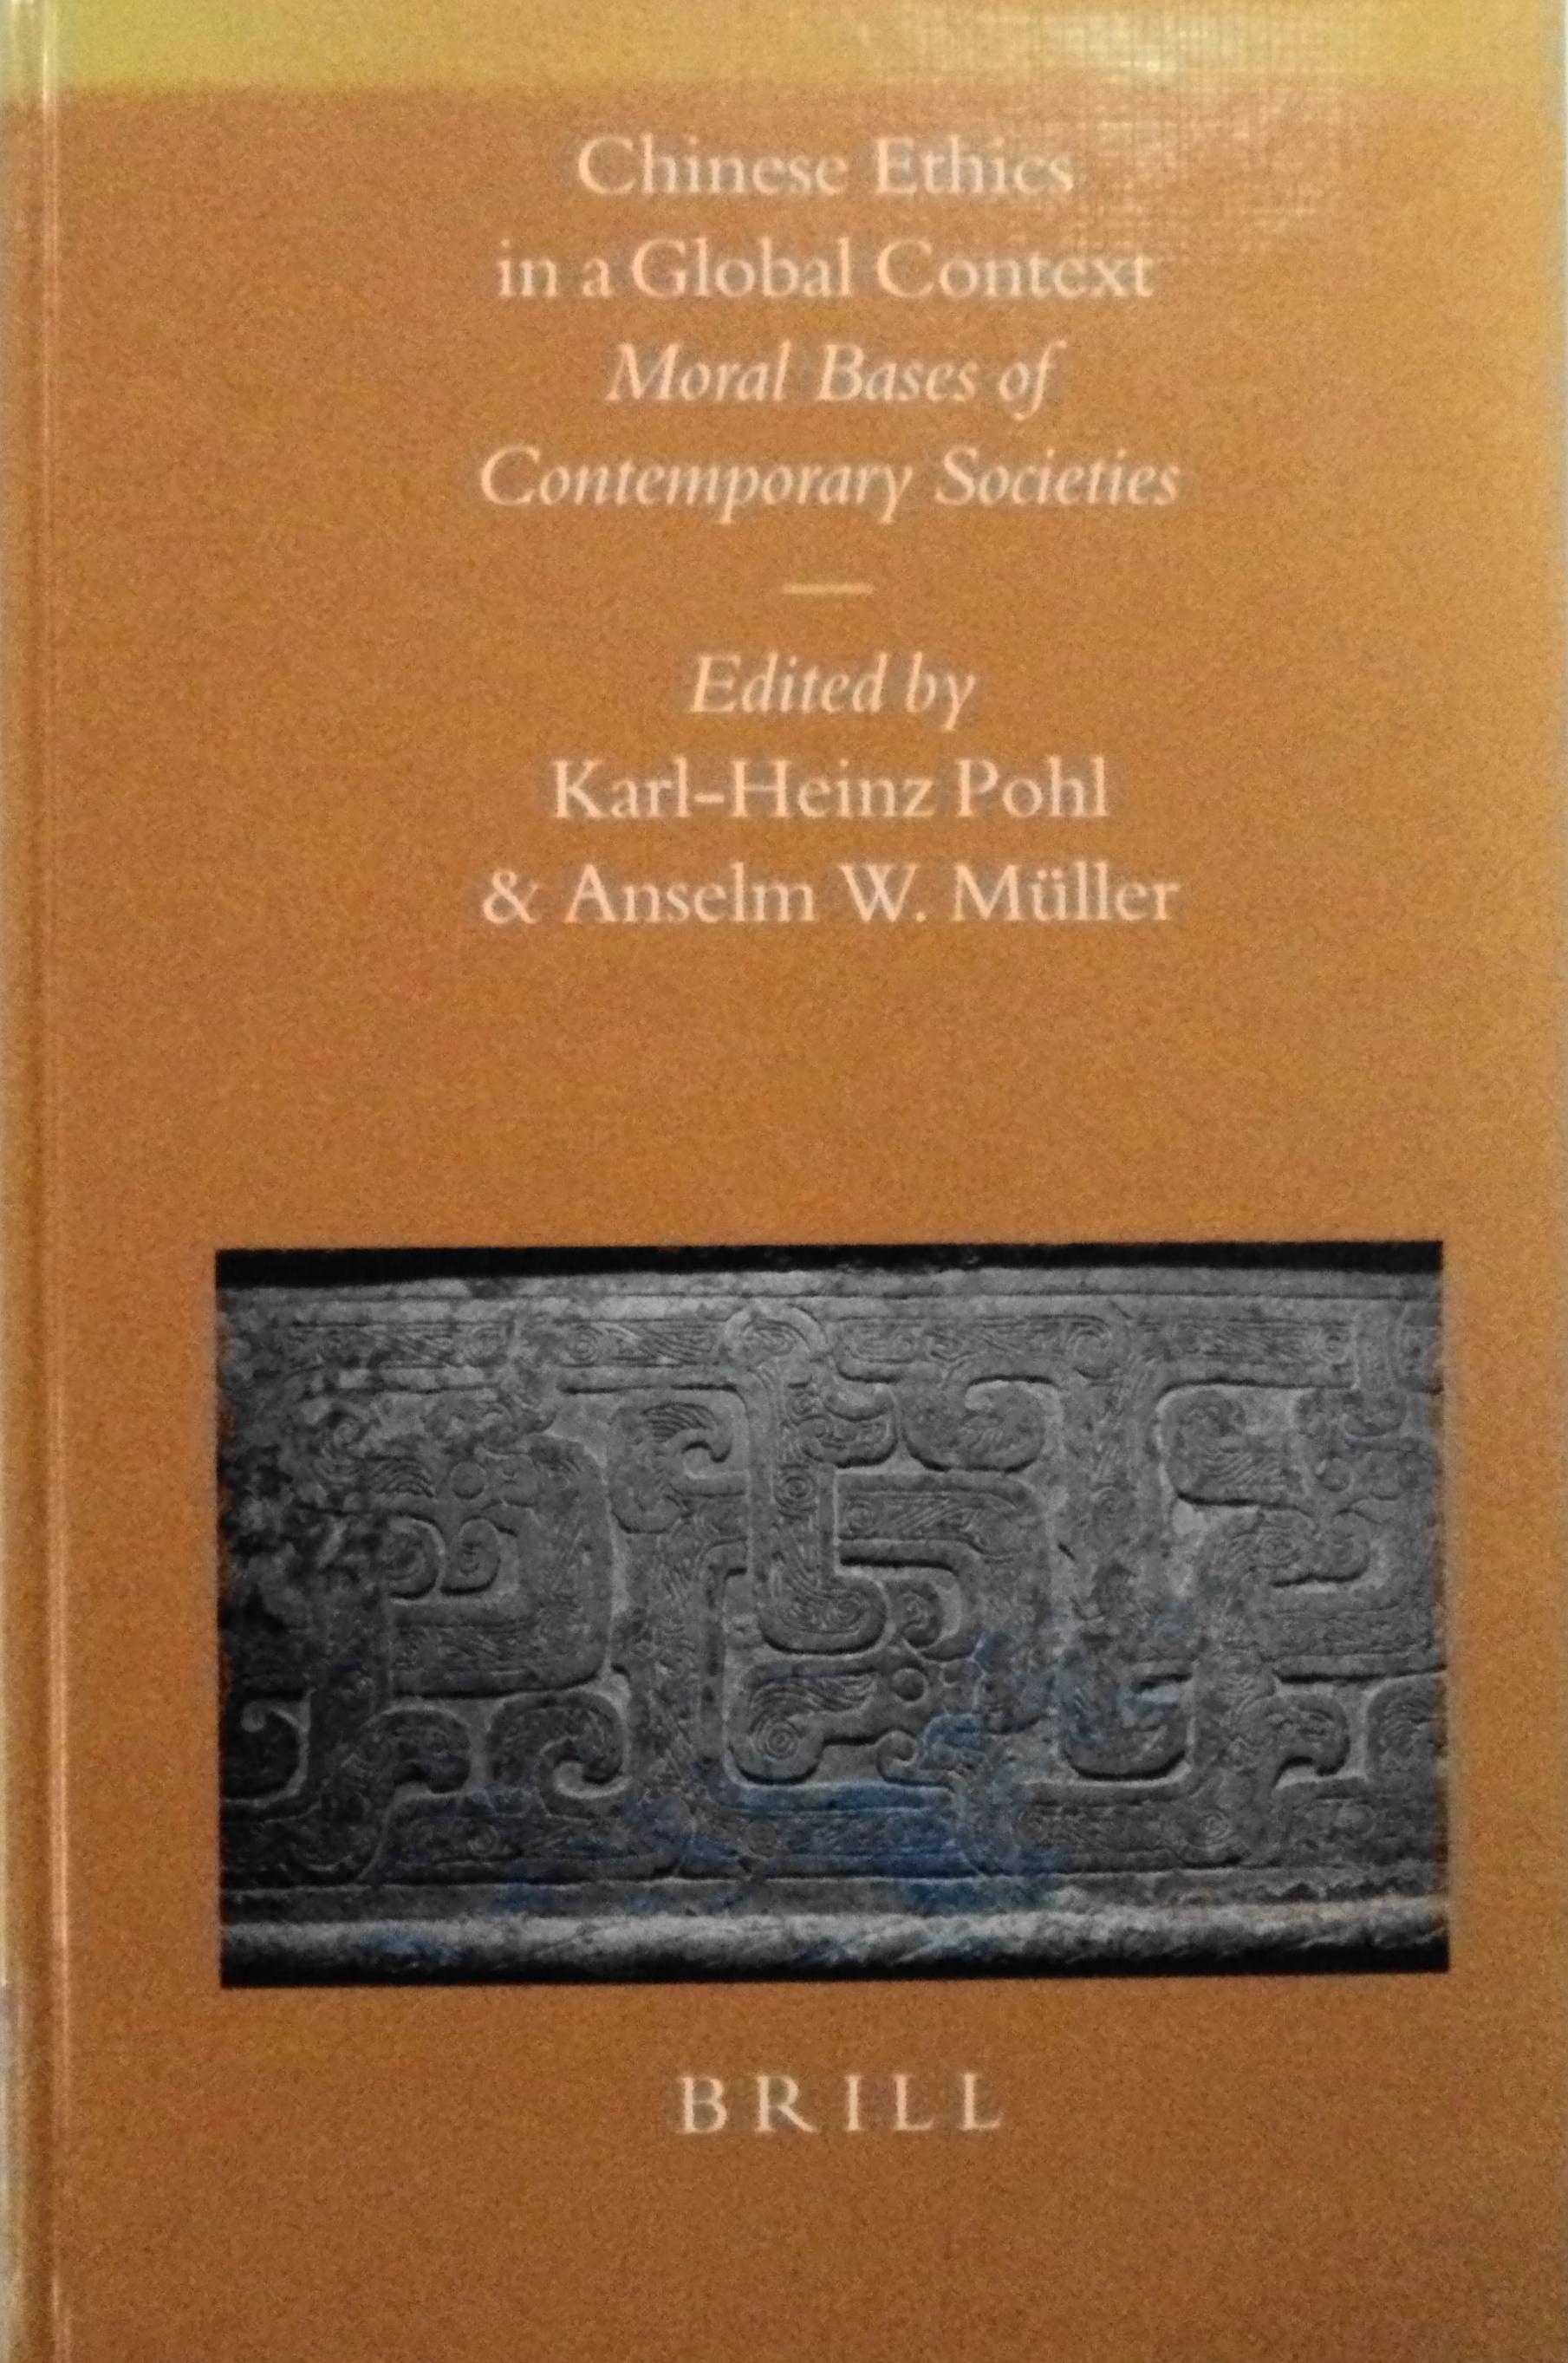 Chinese Ethics in a Global Context: Moral Bases of Contemporary Societies (Sinica Leidensia, 56) - Karl-Heinz Pohl and Anselm W. Muller